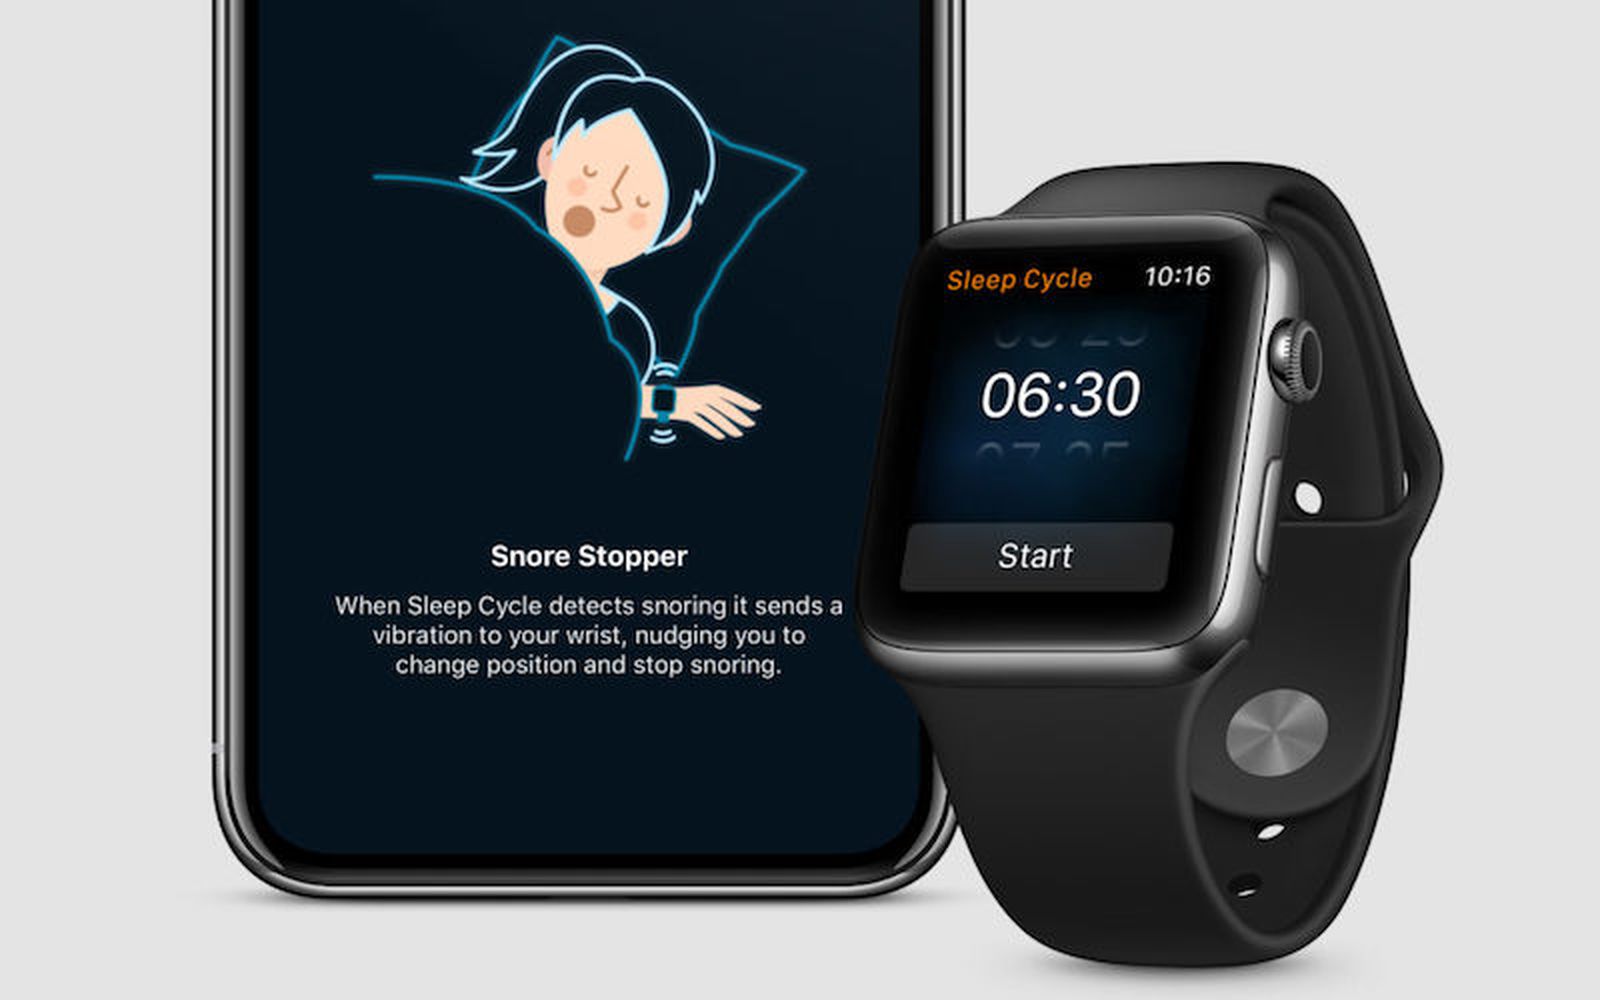 Popular Sleep Cycle iPhone App Expands to Apple Watch With 'Snore Stopper' and Haptic Wake Up Features